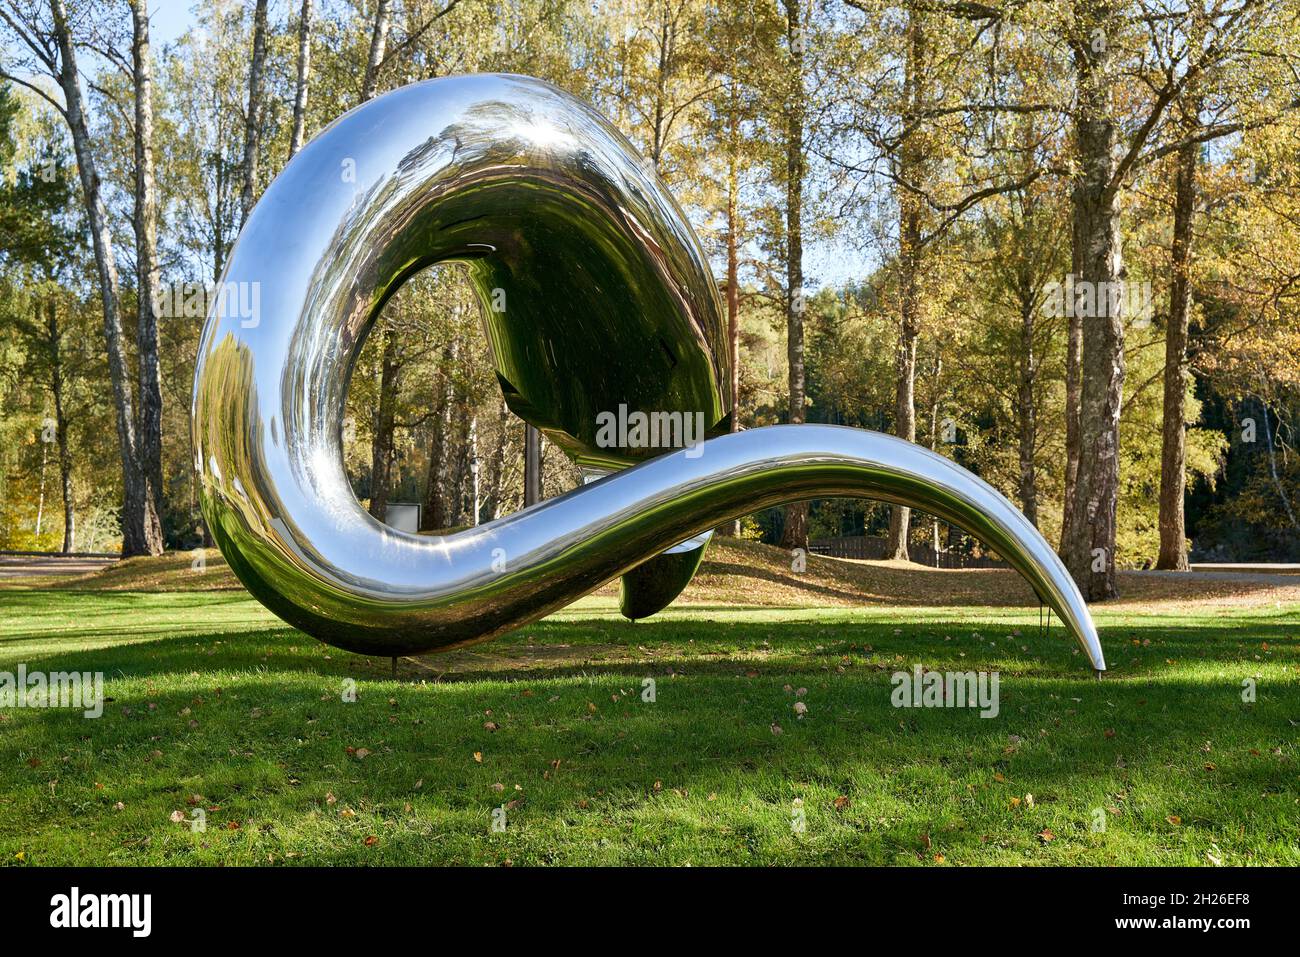 JEVNAKER, NORWEGEN - 25. Sep 2021: A beautiful view of the sculpture I'm Alive (2004) - Tony Cragg, displayed in the Kistefos sculpture Park in Norway. Stockfoto